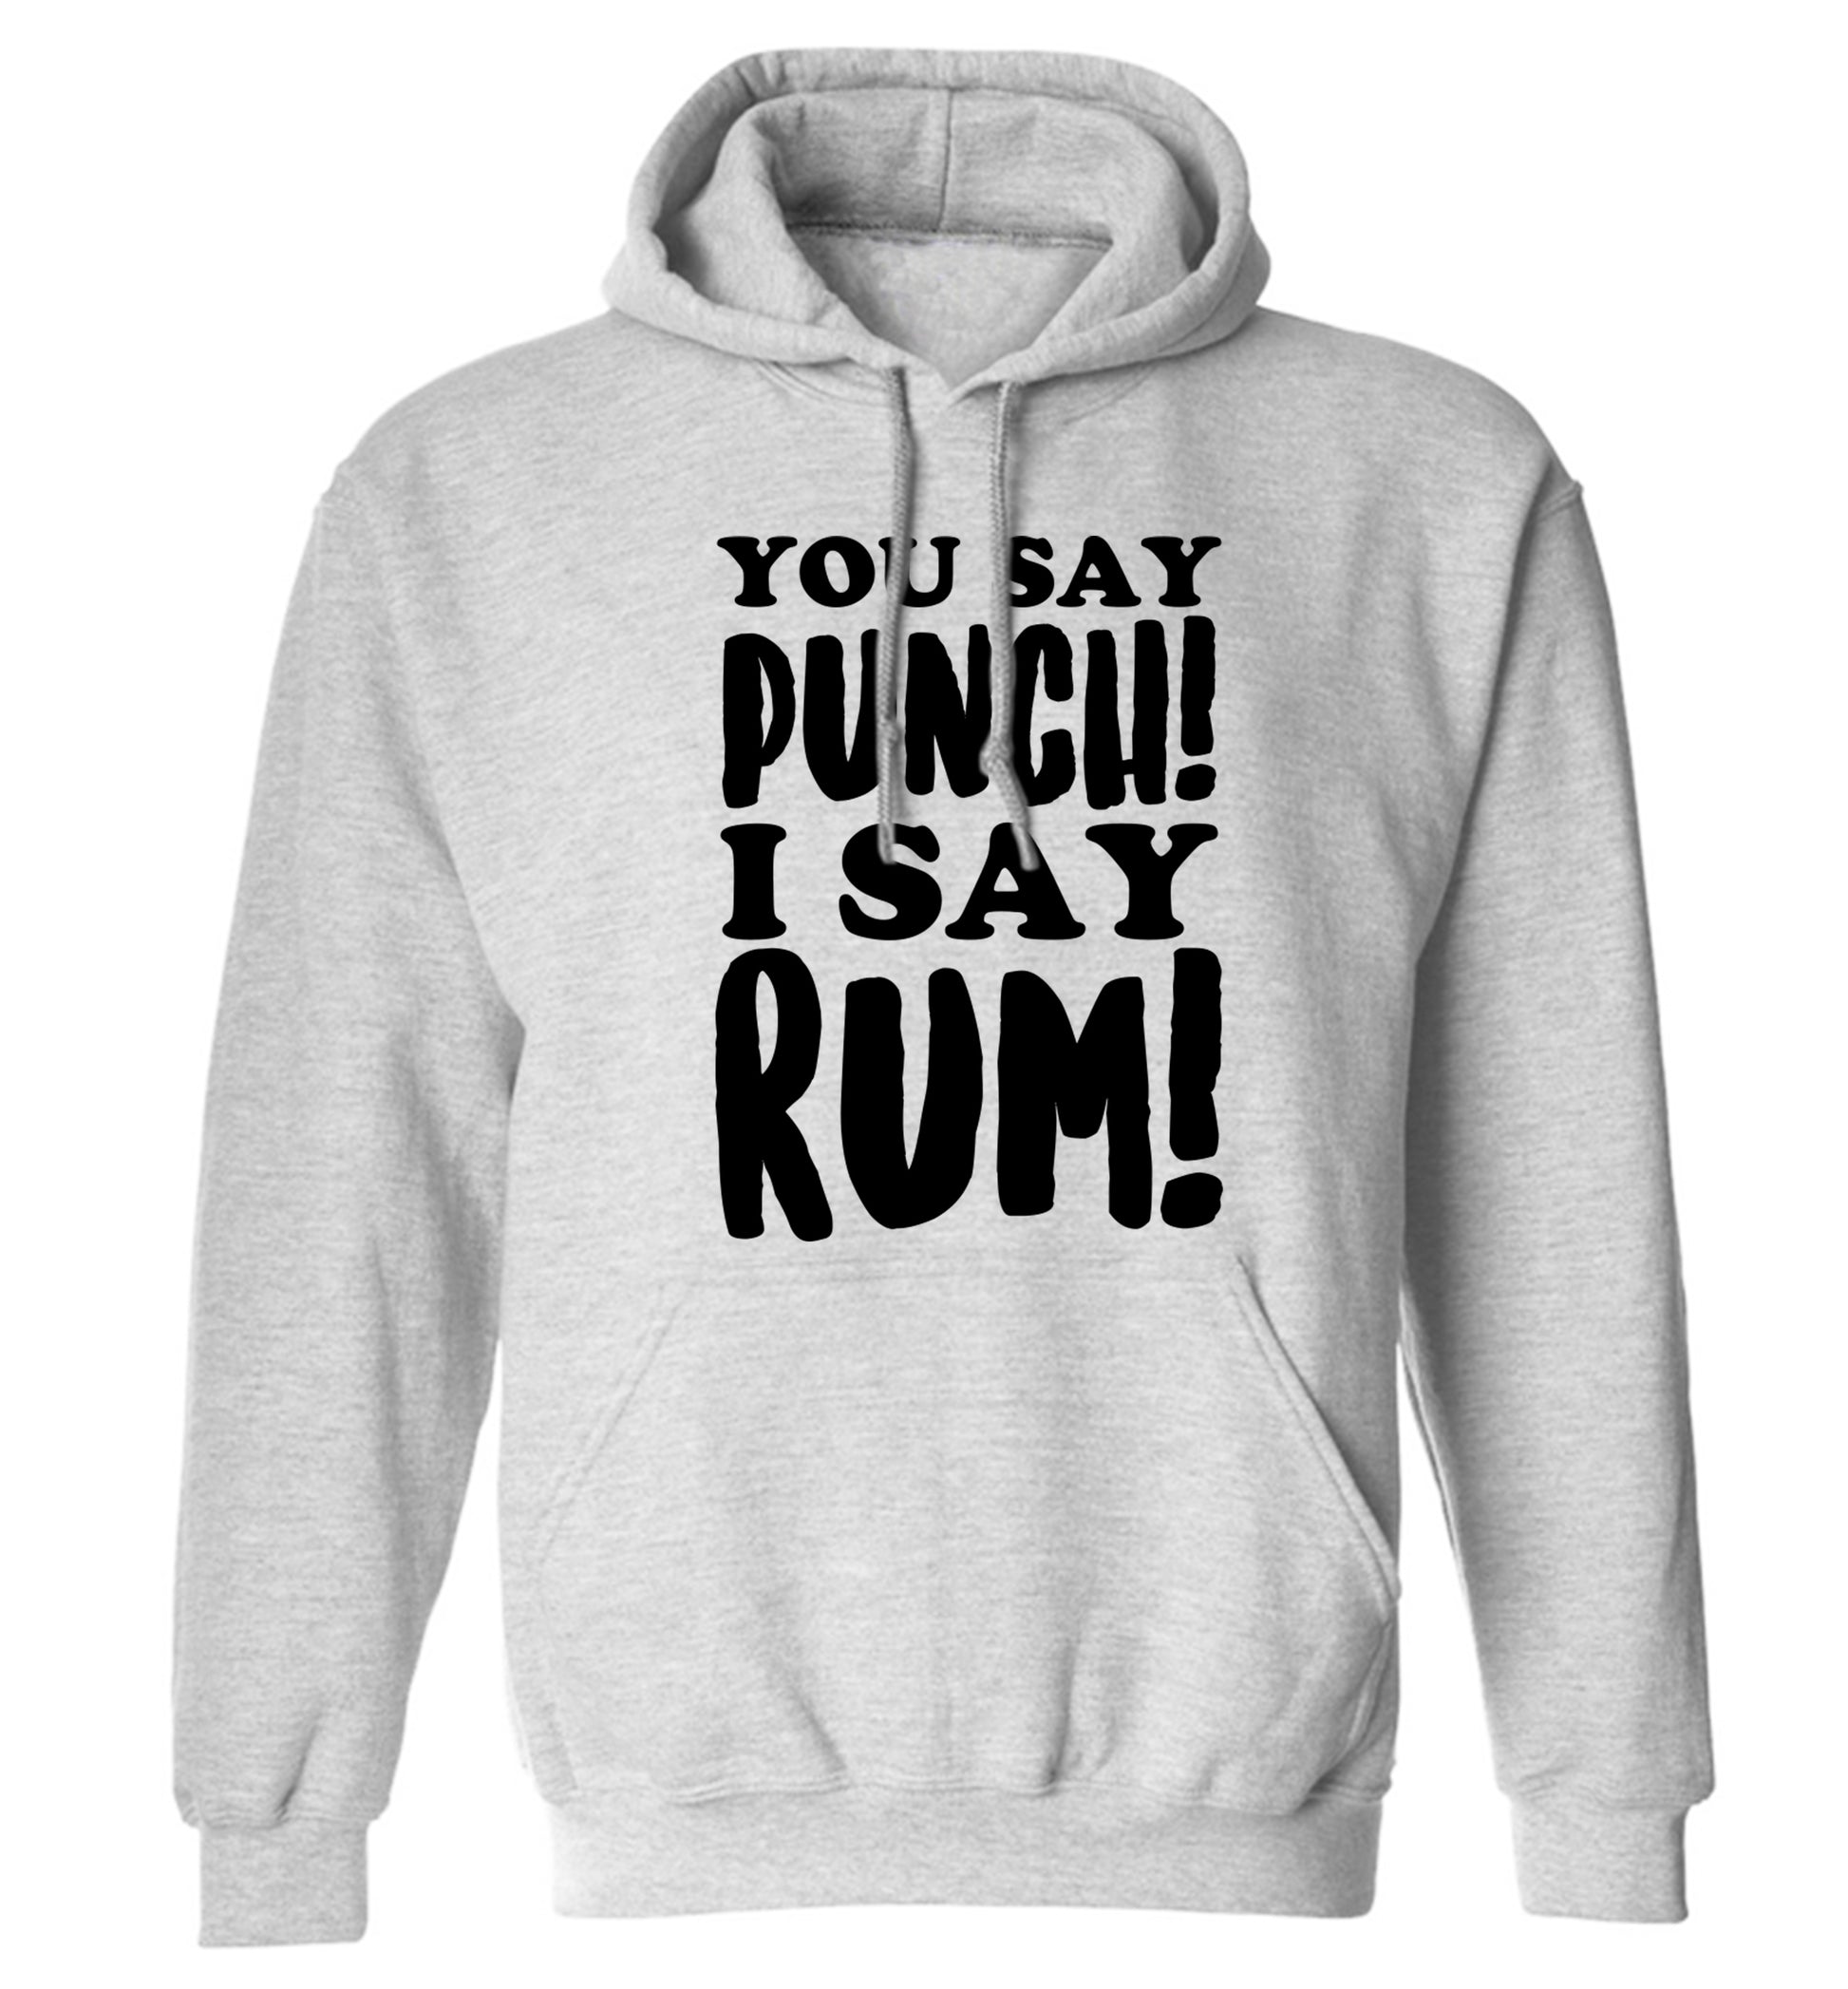 You say punch I say rum! adults unisex grey hoodie 2XL